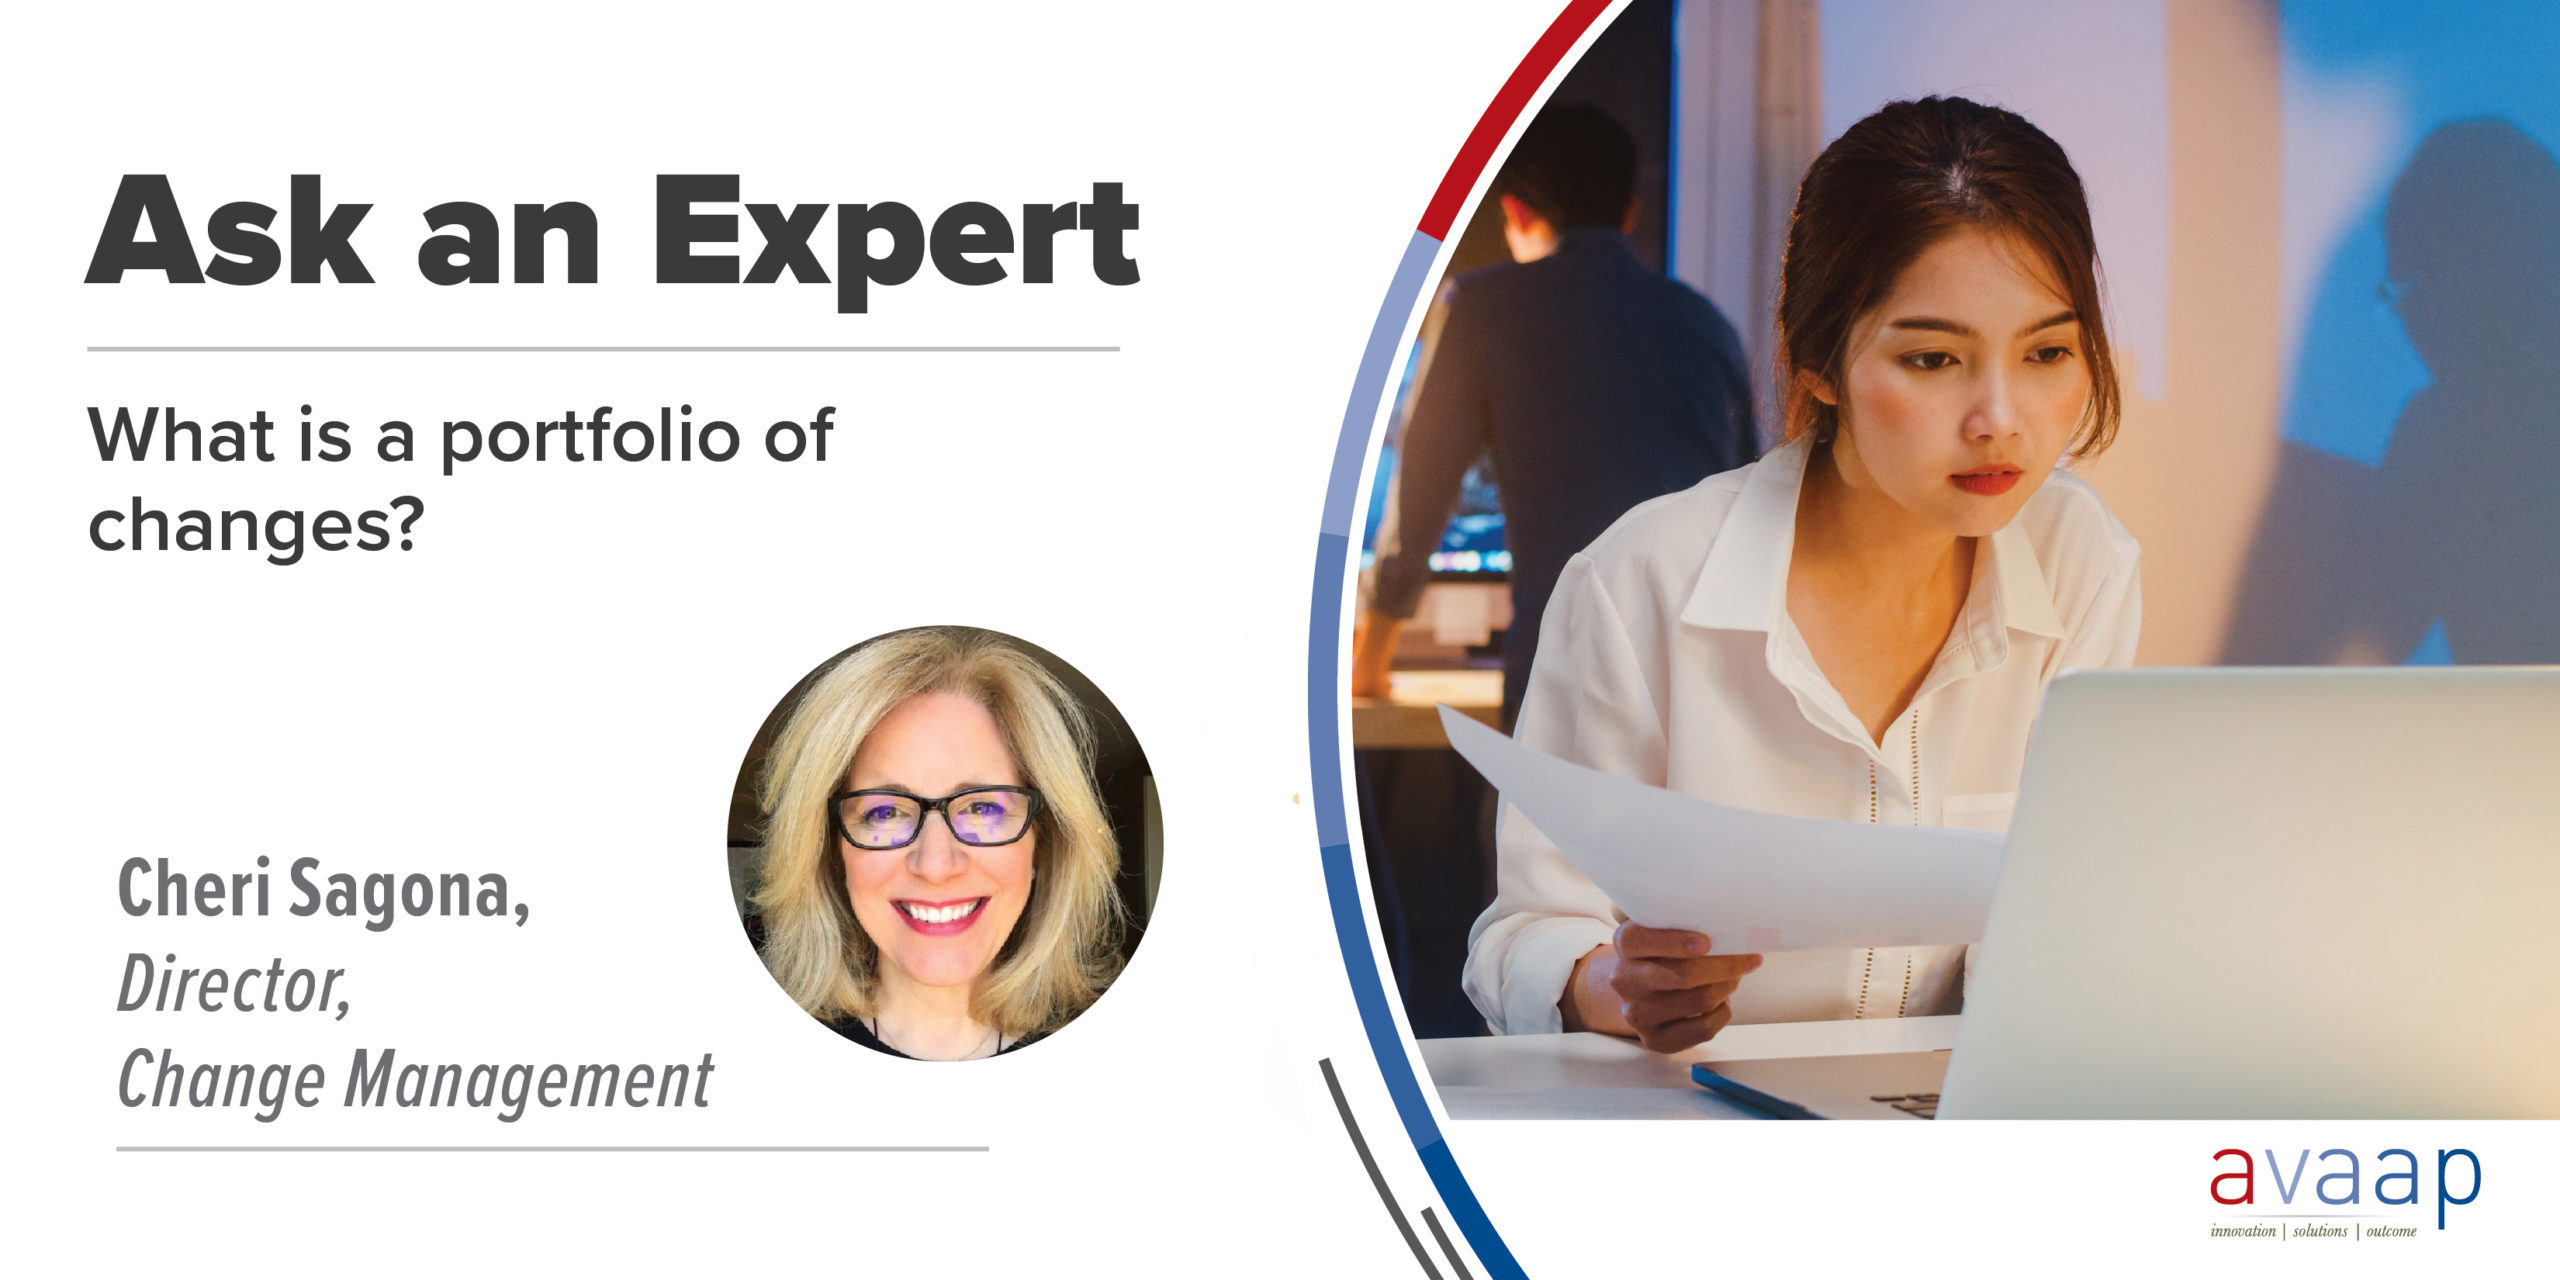 Ask an Expert - What is a Portfolio of Changes?